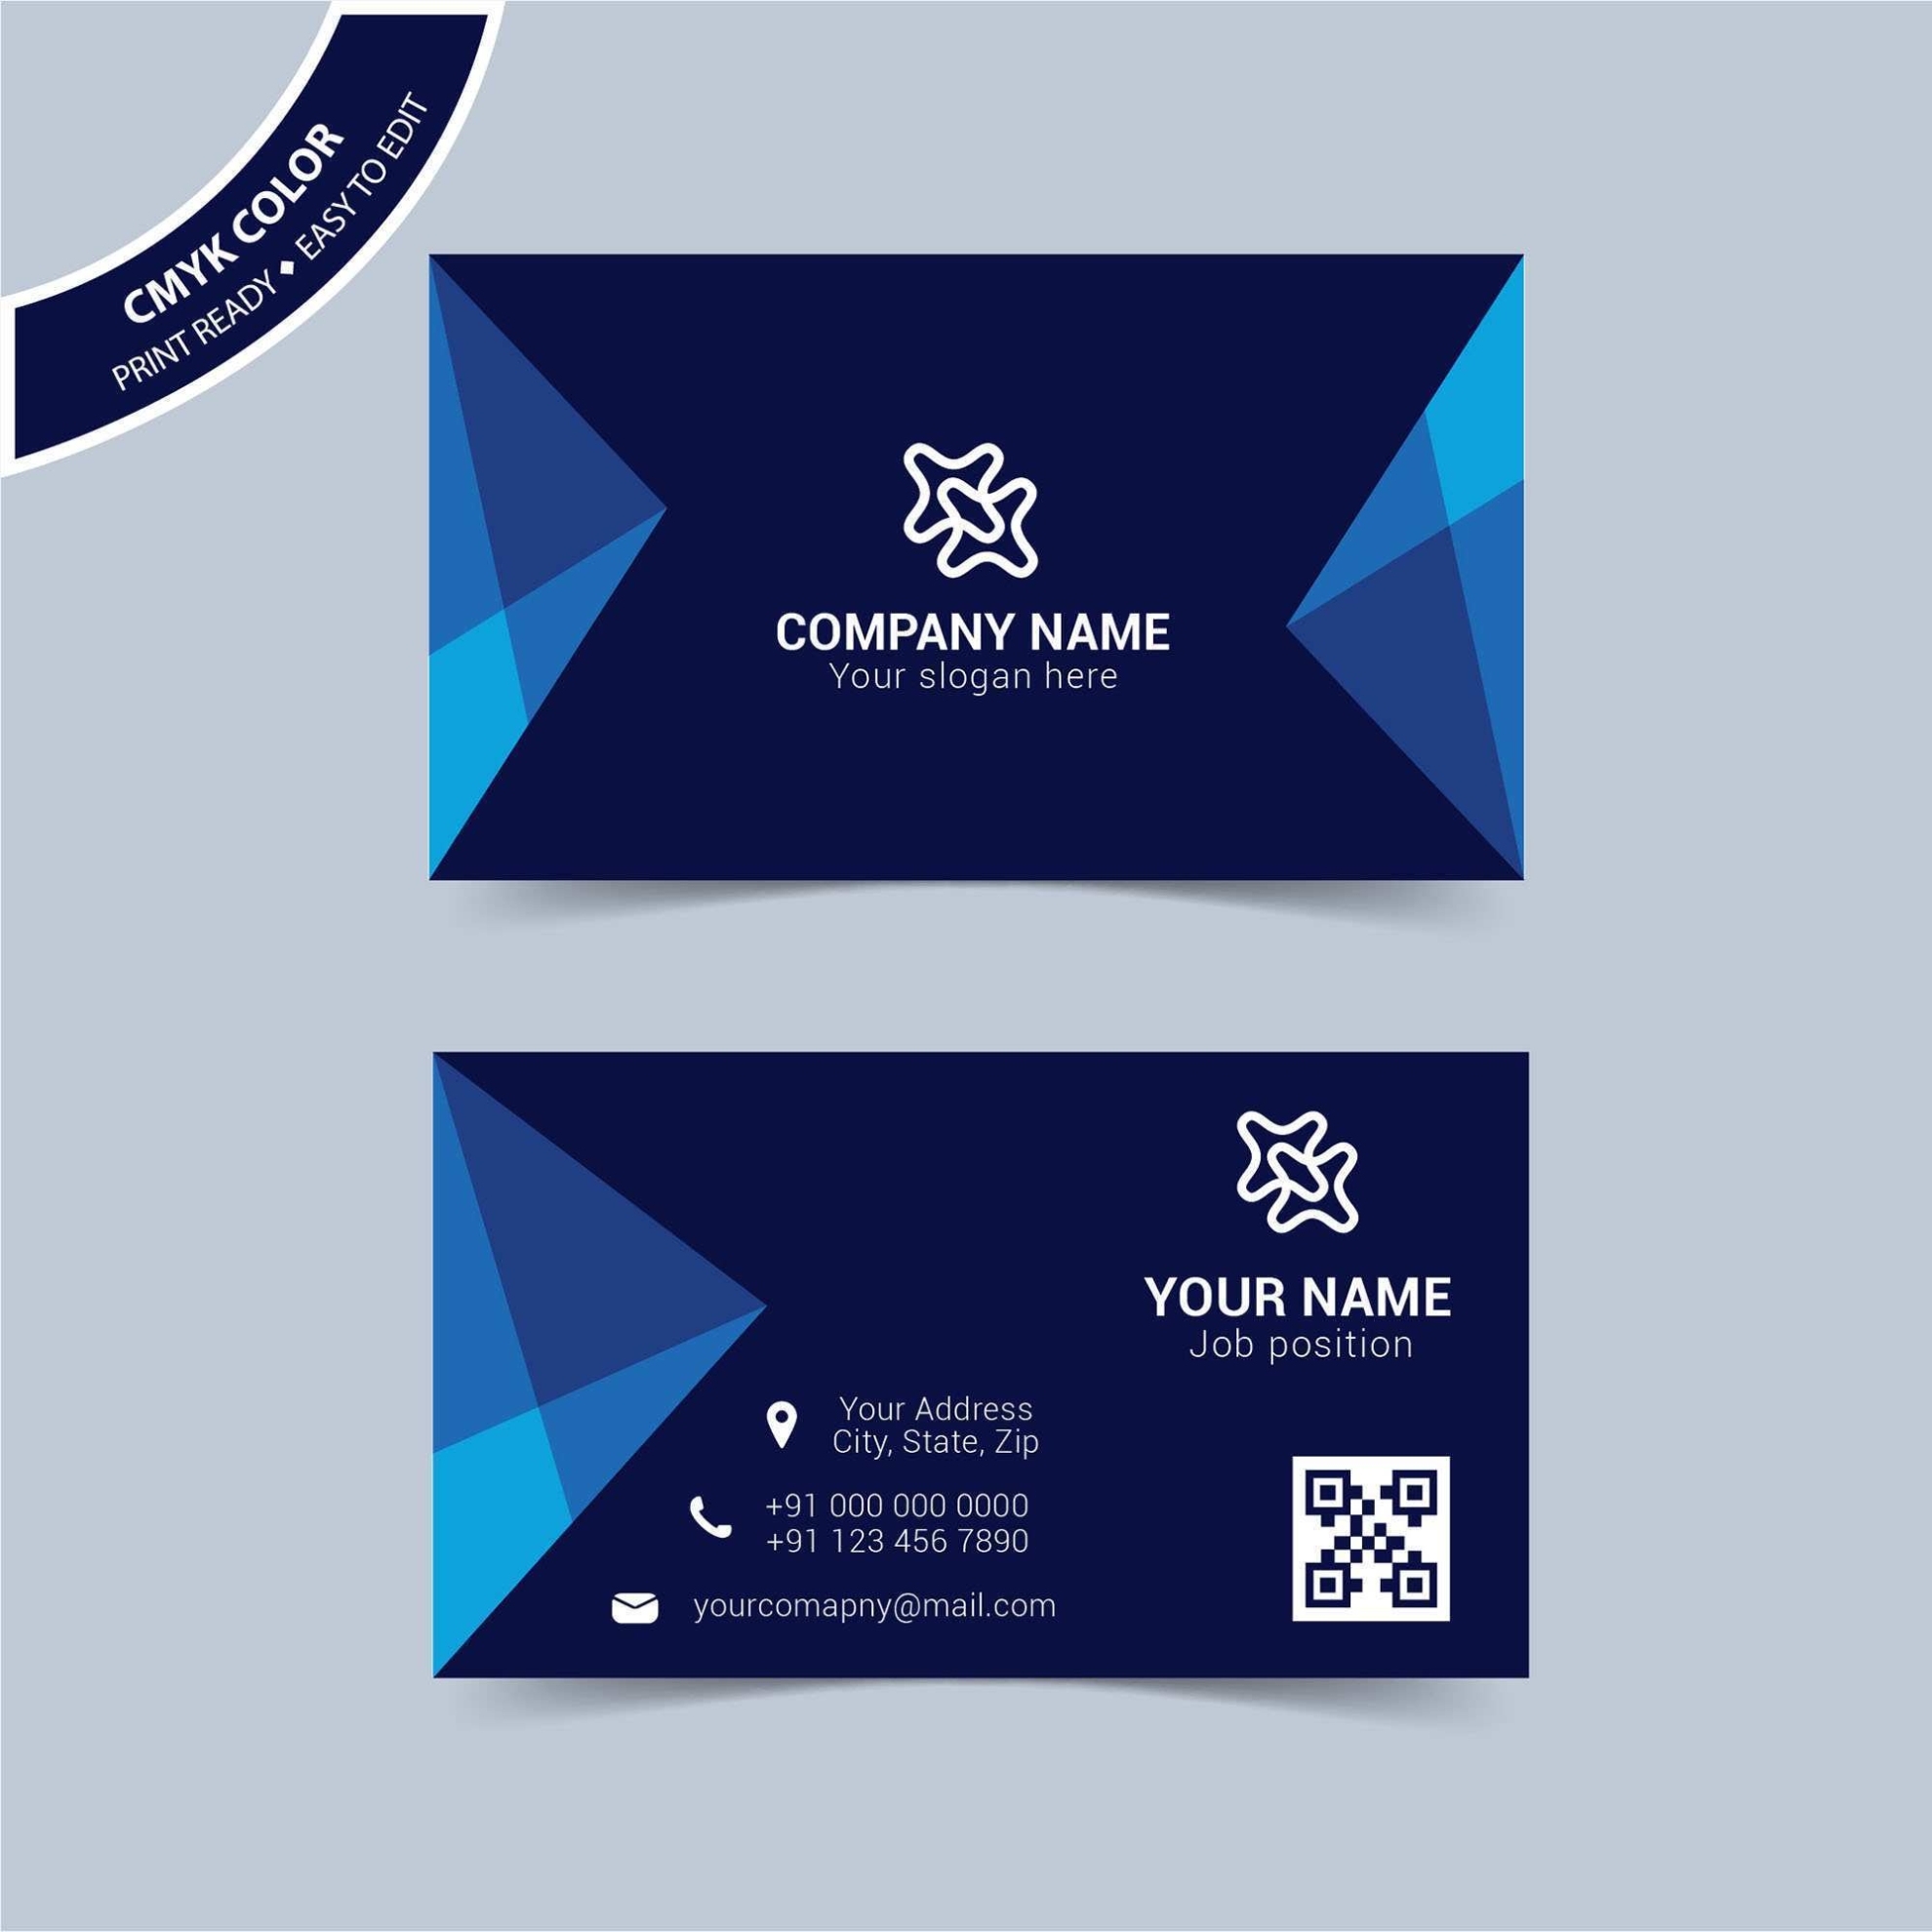 Microsoft Office Business Card Template : 87 Customize Our Free Microsoft Word Business Card Within Microsoft Office Business Card Template